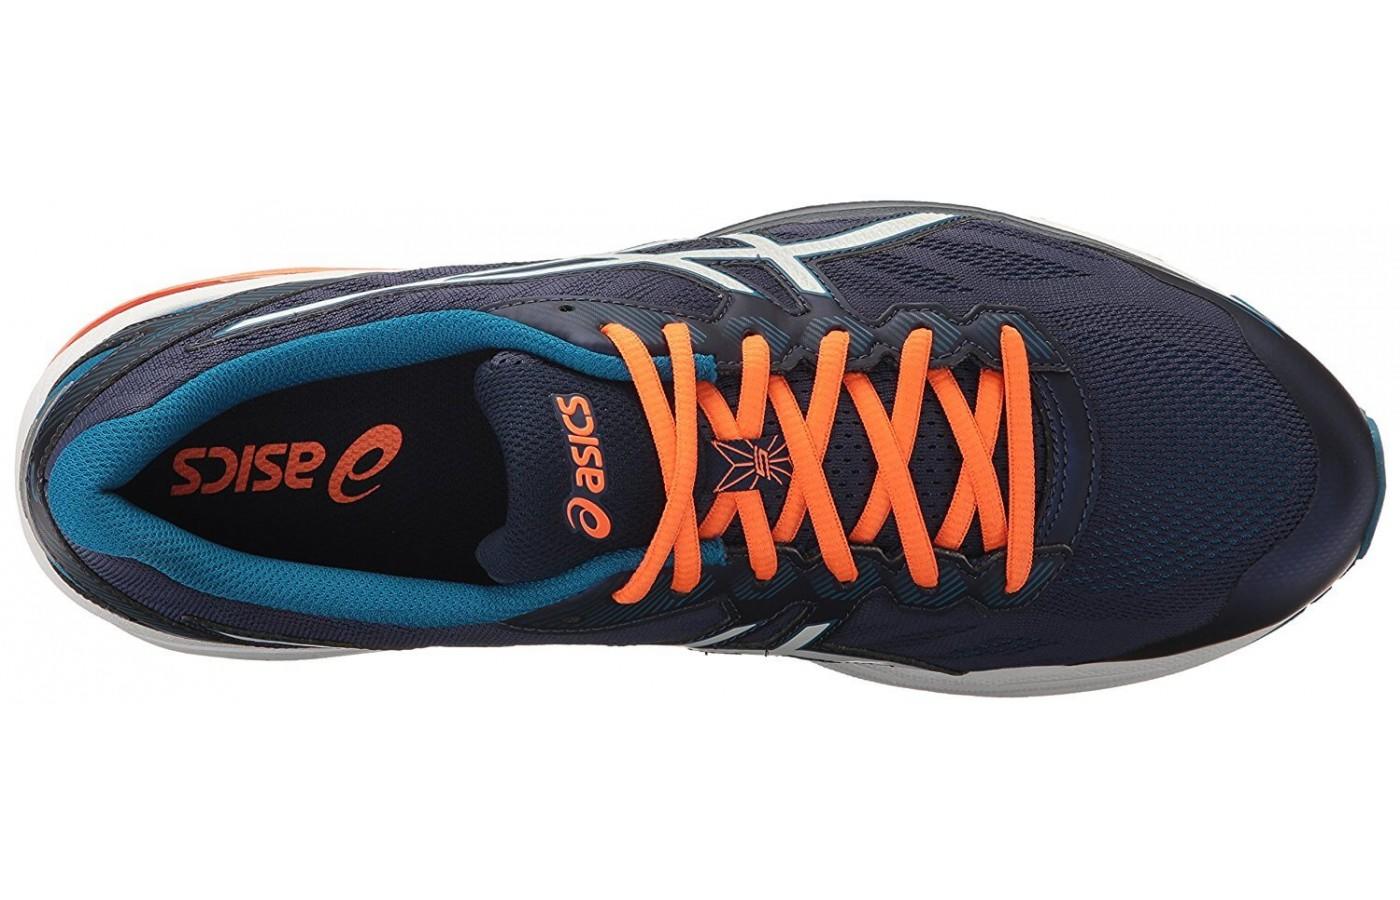 Asics GT 1000 6 Review - To buy or not in 2024 - StripeFit